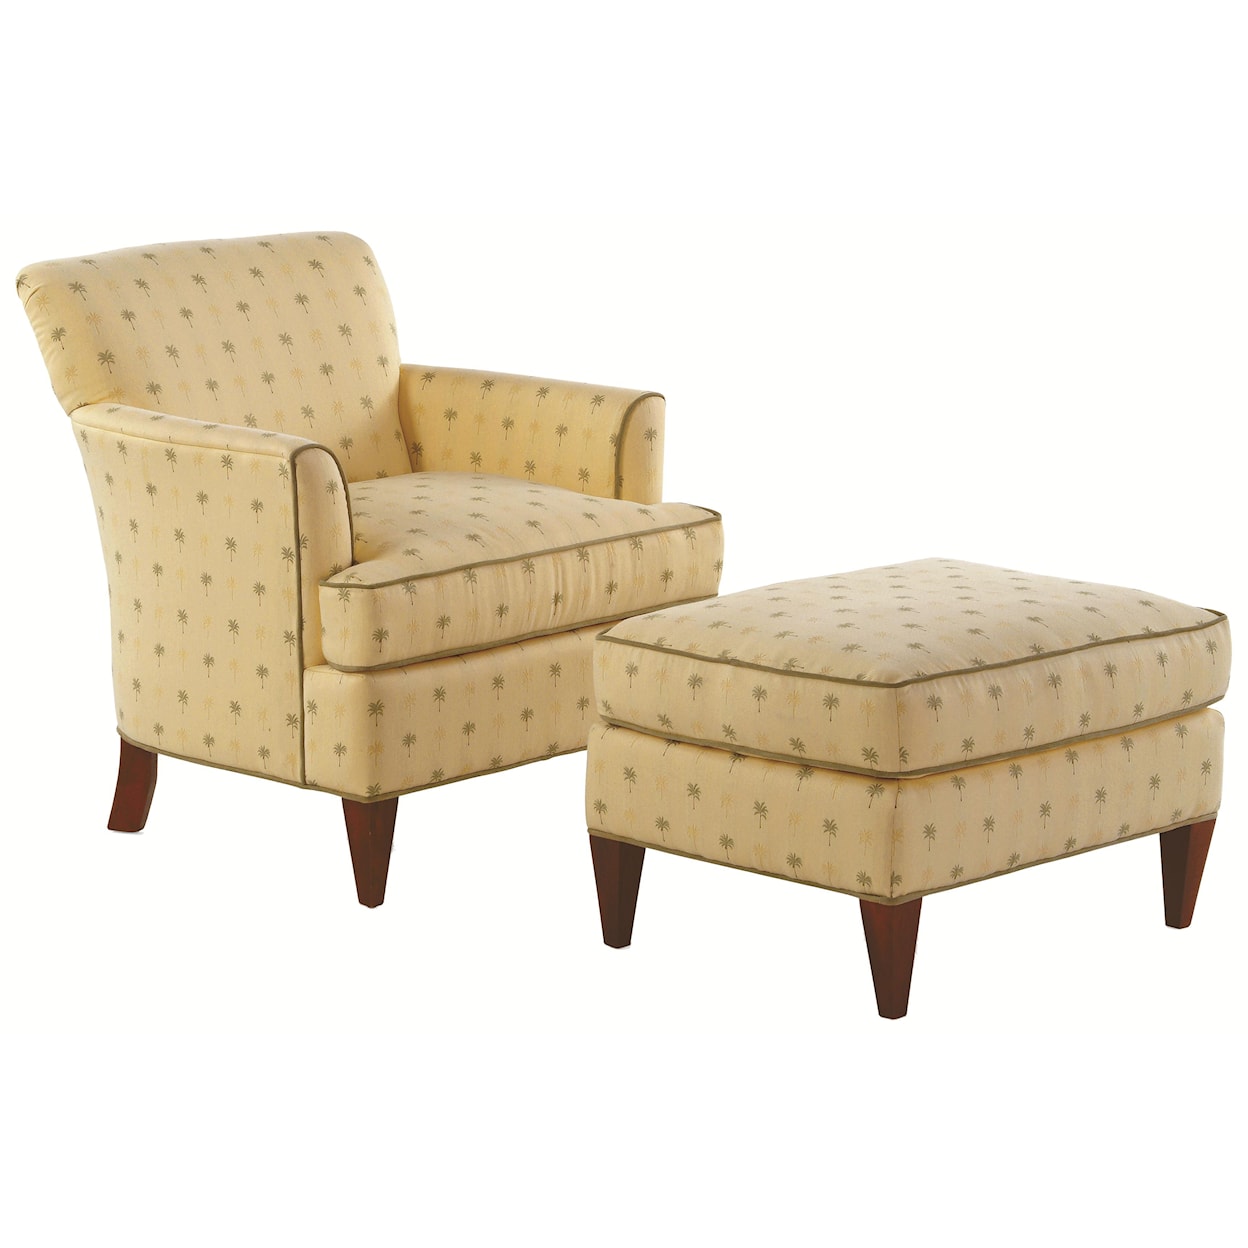 Braxton Culler Accent Chairs Casual Sloane Ottoman